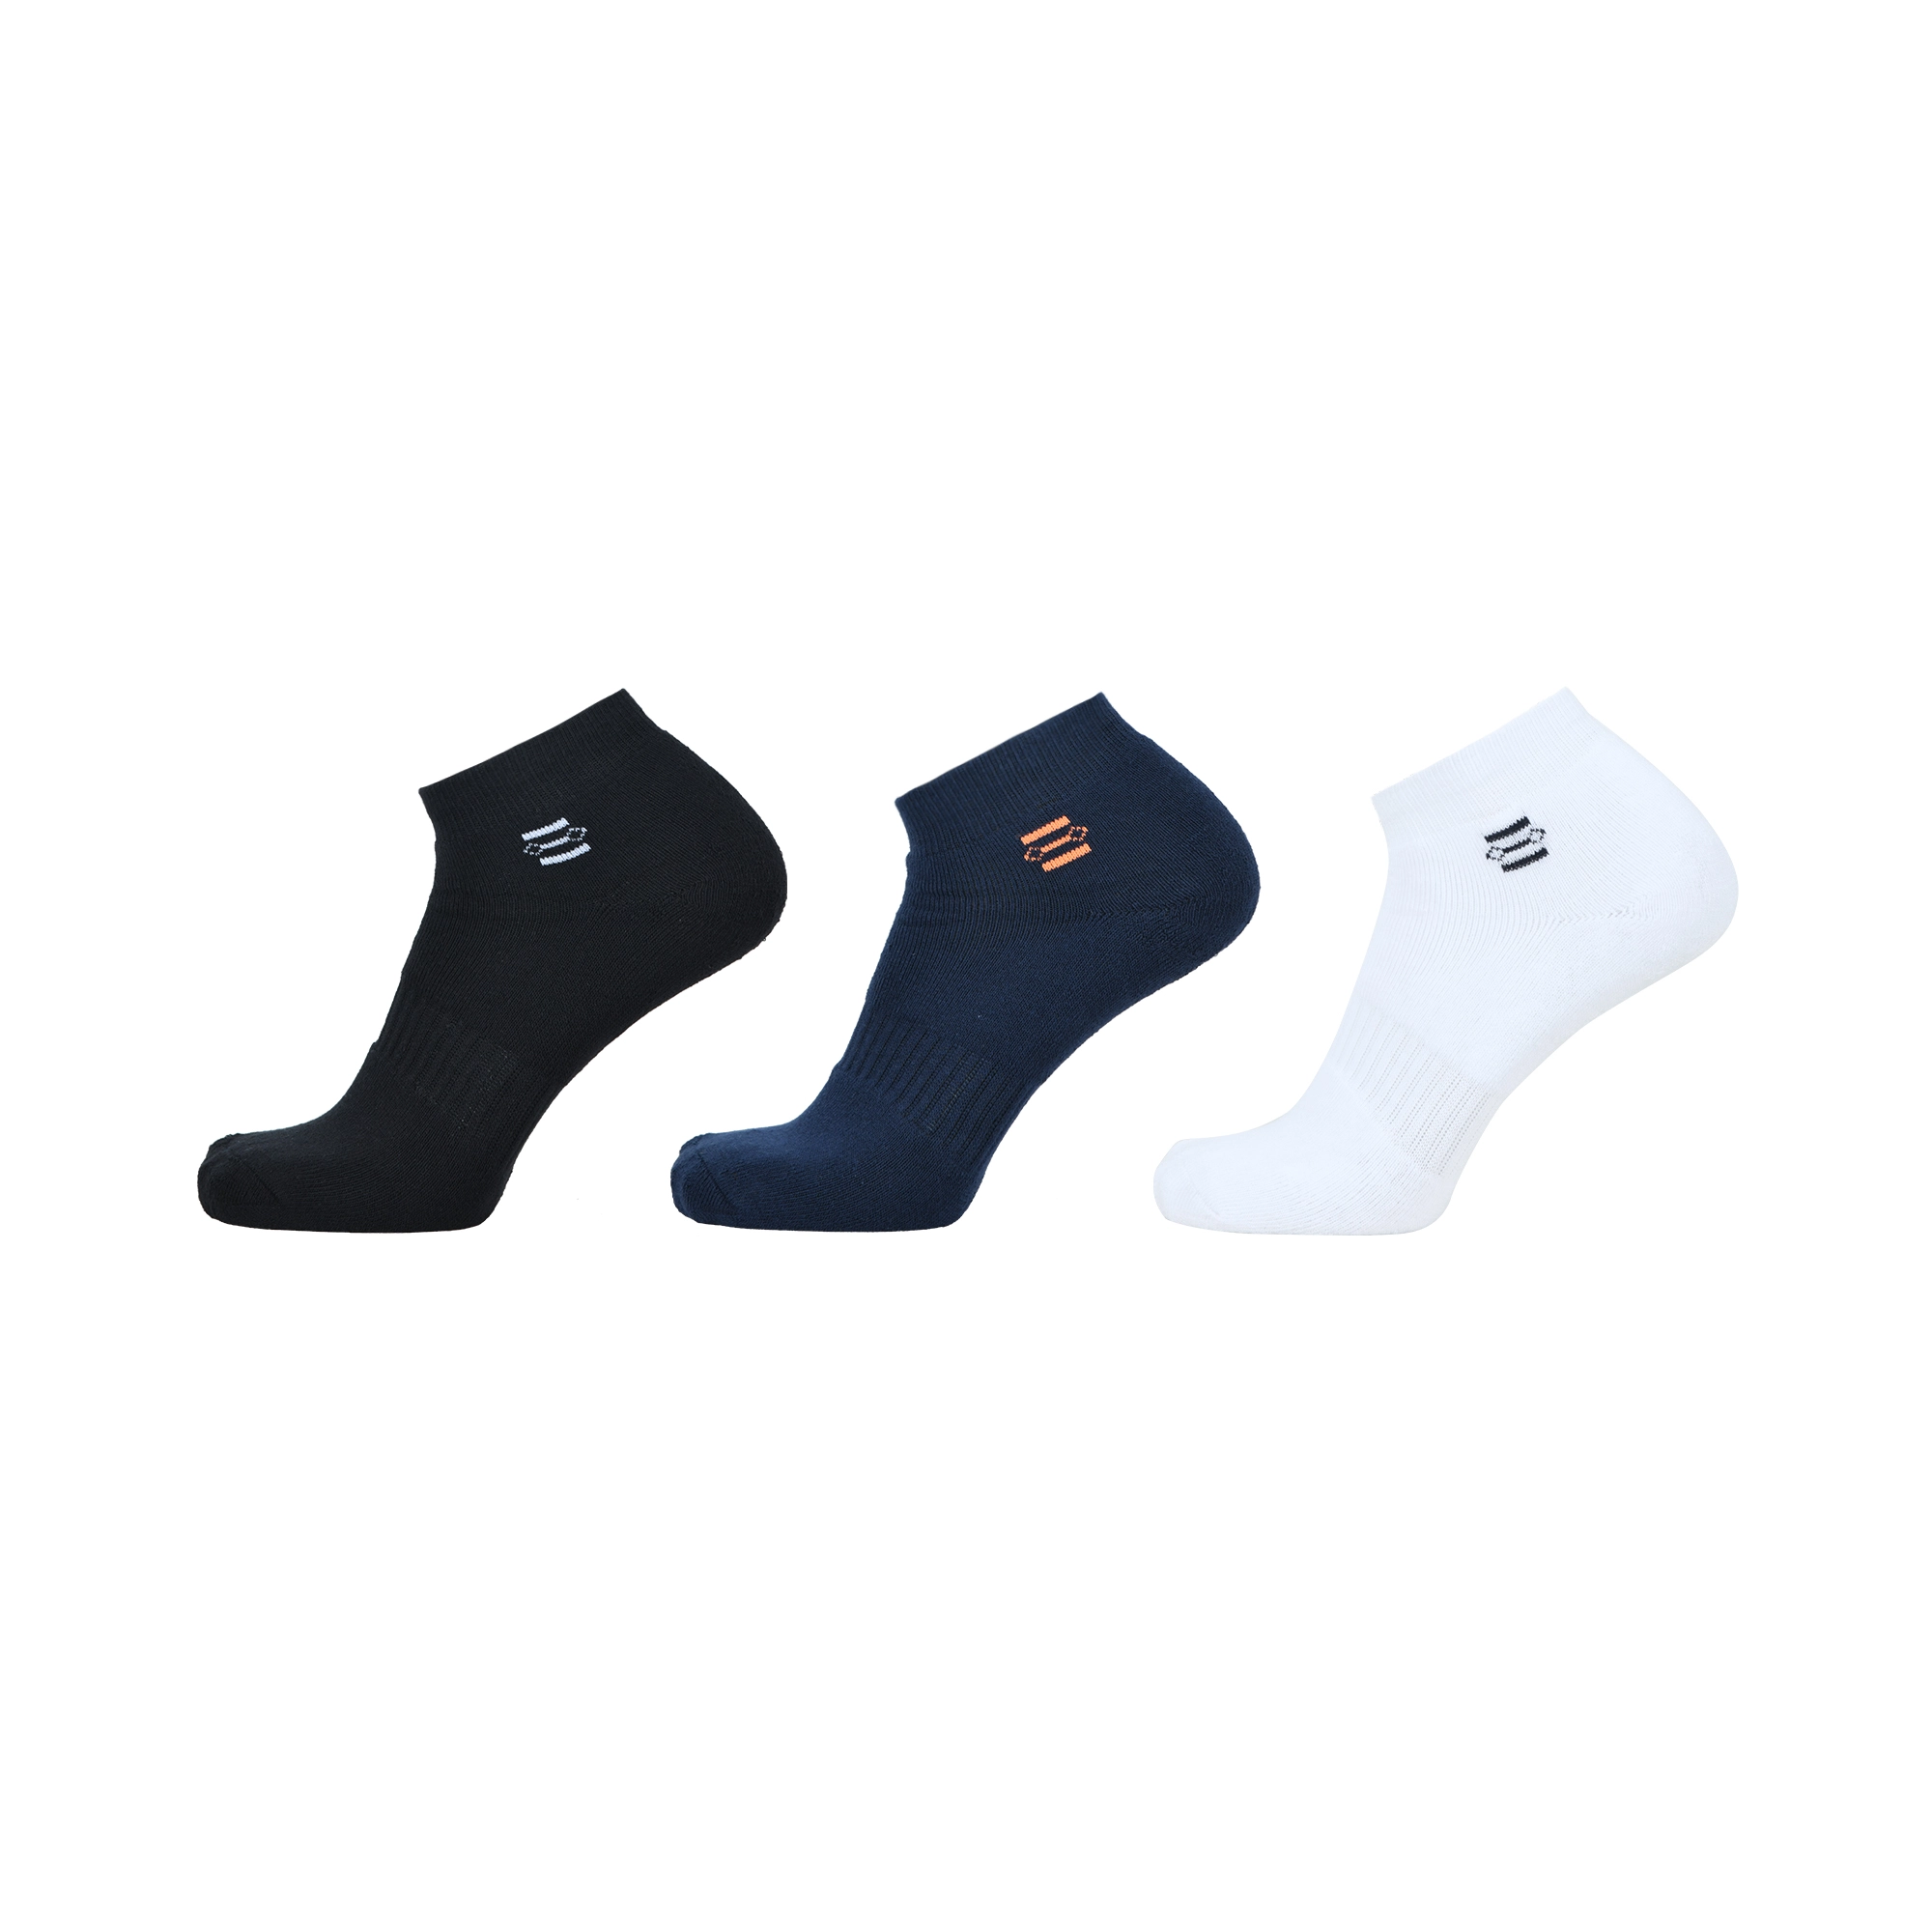 Terry Towel Cotton Socks Men's Ankle Length Price Online | Sports Gym ...